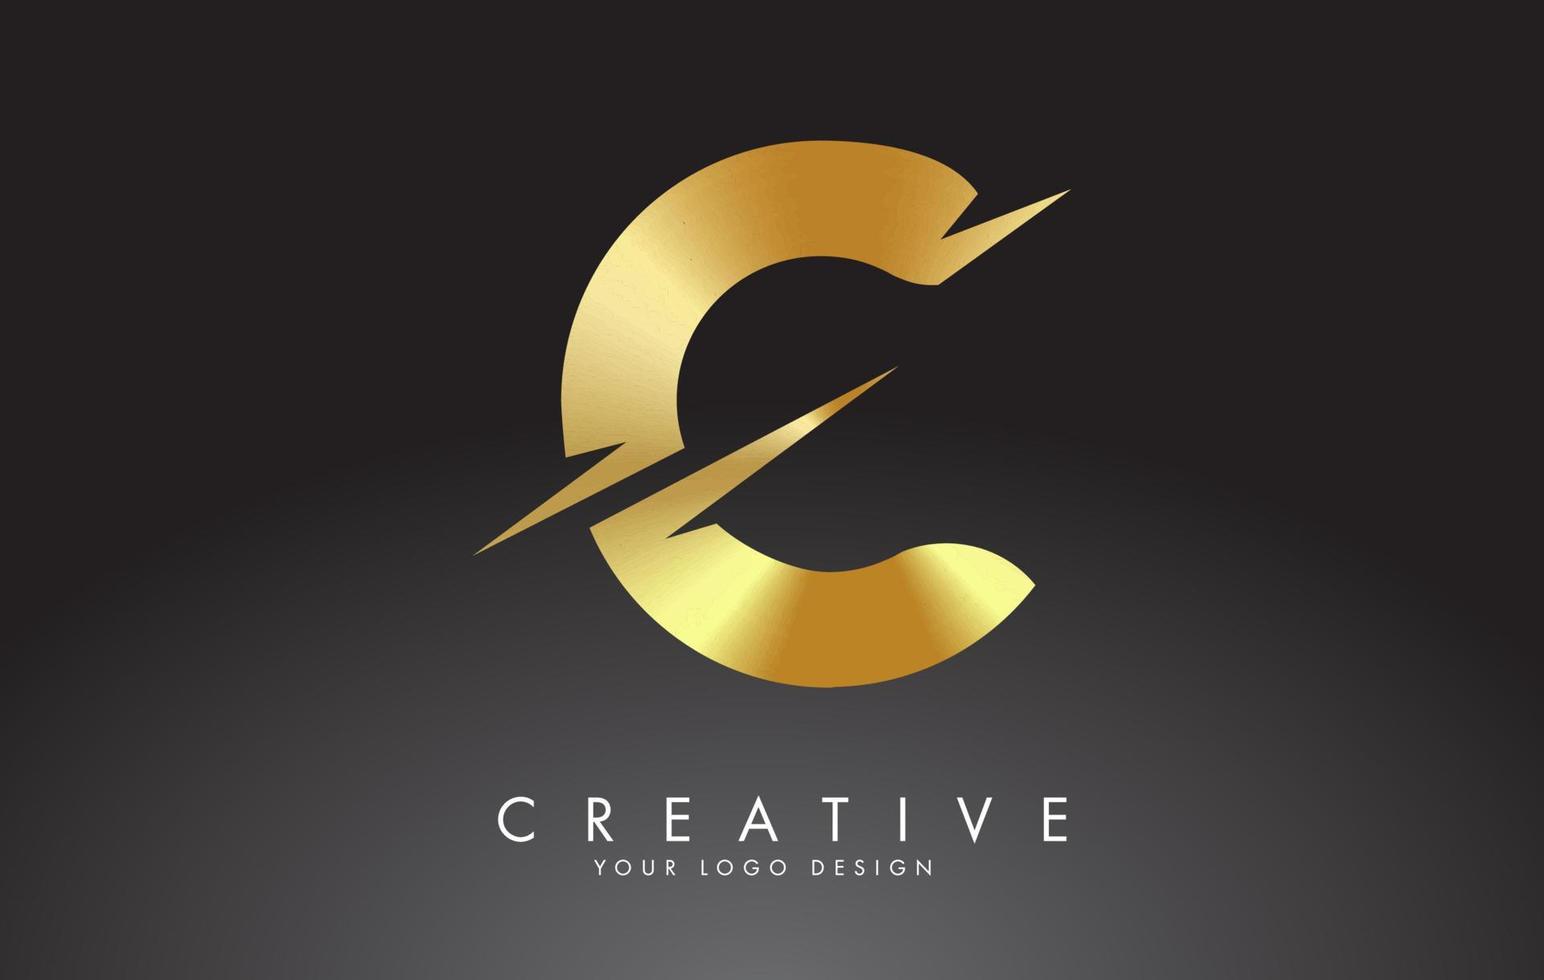 Golden C Letter Logo Design with Creative Cuts. vector